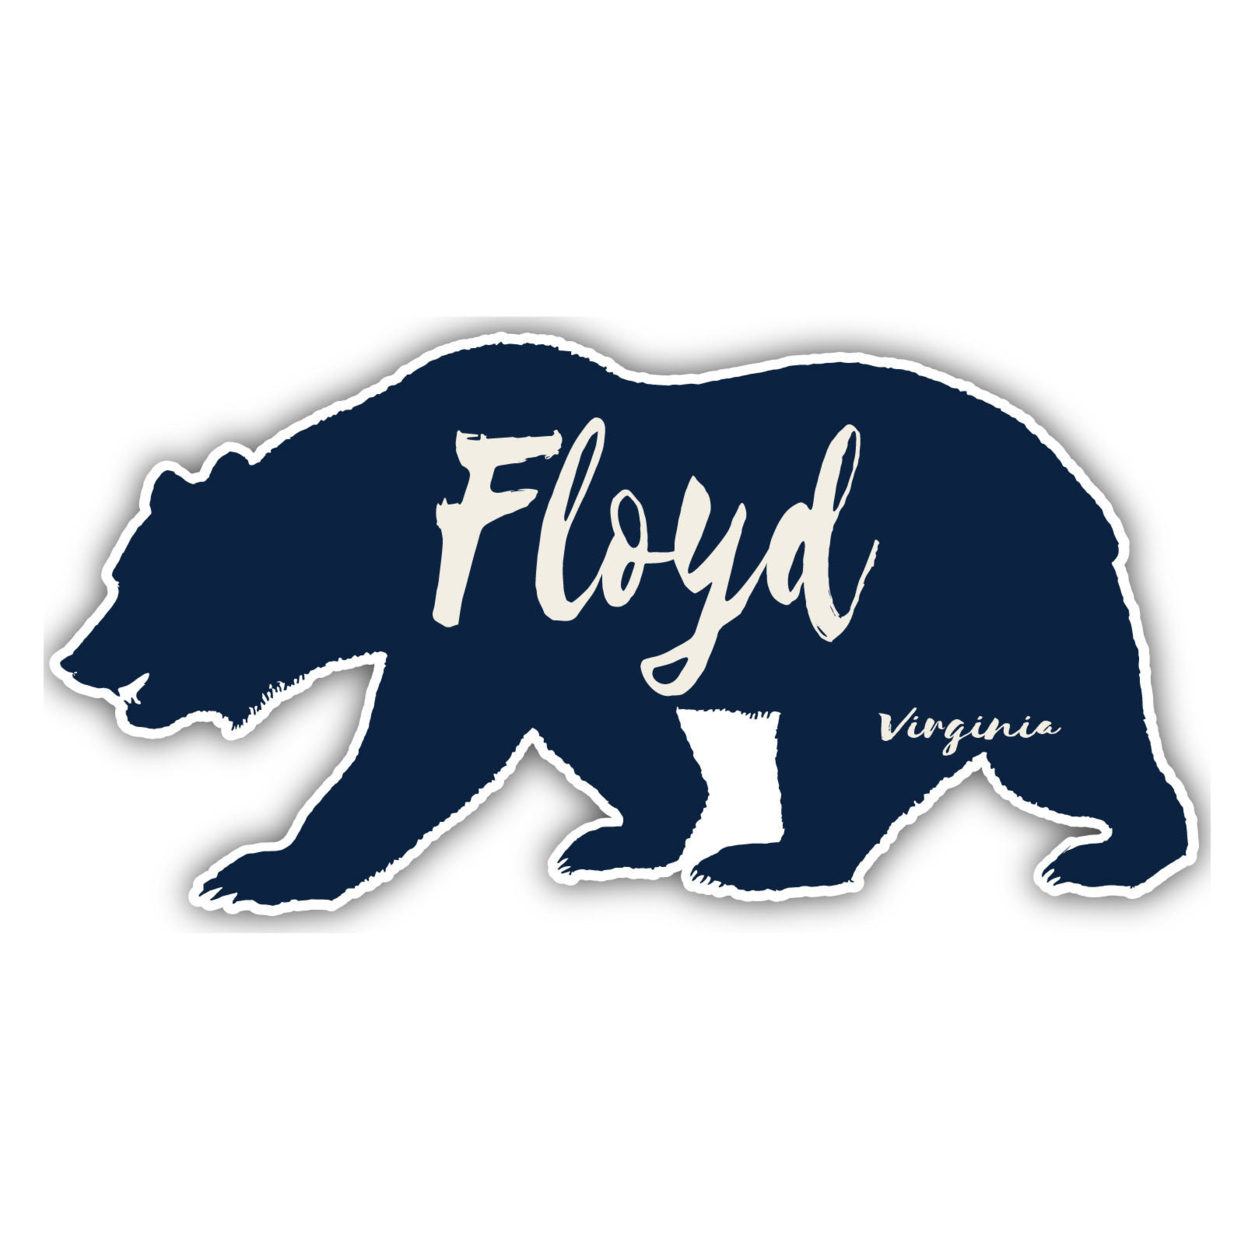 Floyd Virginia Souvenir Decorative Stickers (Choose Theme And Size) - 4-Pack, 6-Inch, Bear